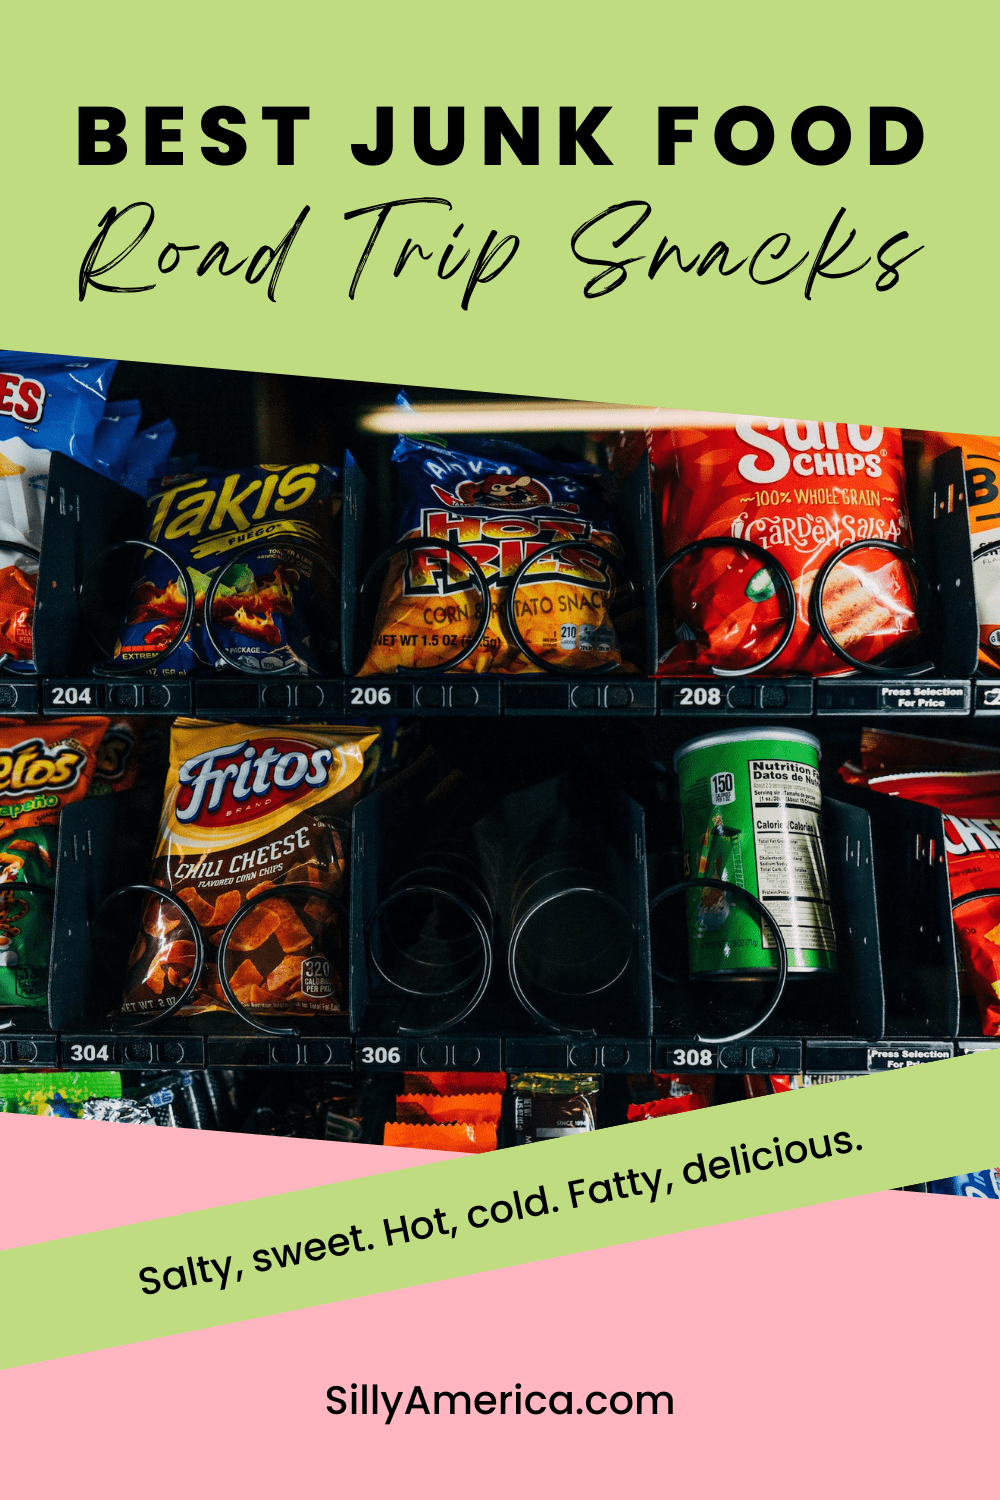 What do you reach for when you reach for a road trip snack? The best junk food road trip snacks are found in gas stations, convenience stores, fast food drive throughs, travel centers, and hotel and rest area vending machines. Salty, sweet. Hot, cold. Fatty, delicious. Read on to find the best junk food road trip snacks that you'll definitely want to pull over for. #RoadTrip #RoadTripSnacks #RoadTripJunkFood #JunkFoodRoadTripSnacks